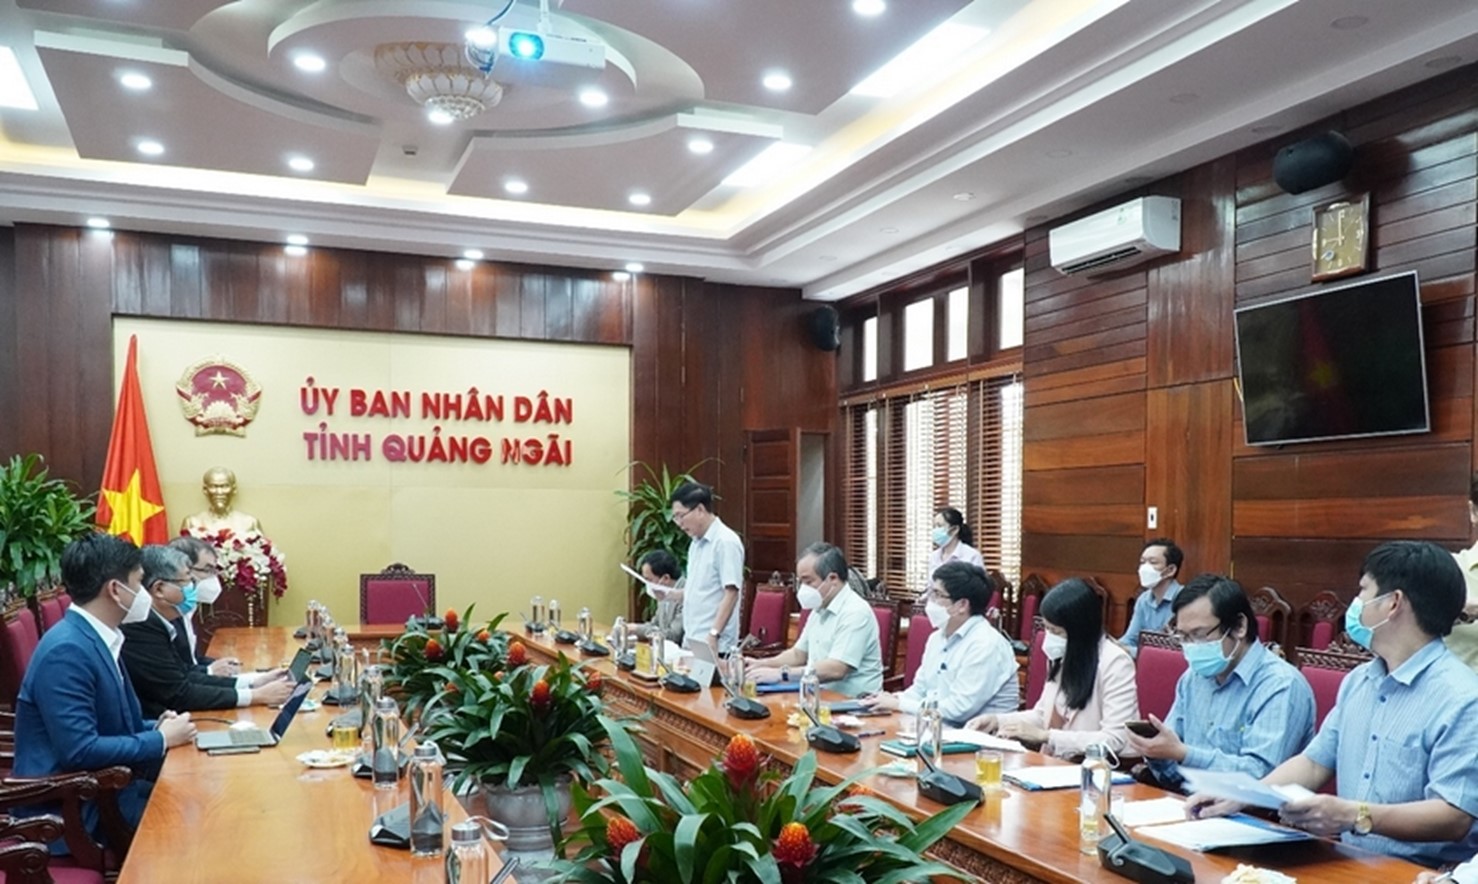 University of Science and Technology, the University of Danang exchanges and cooperates with Quang Ngai Province on vocational guidance and STEM experience